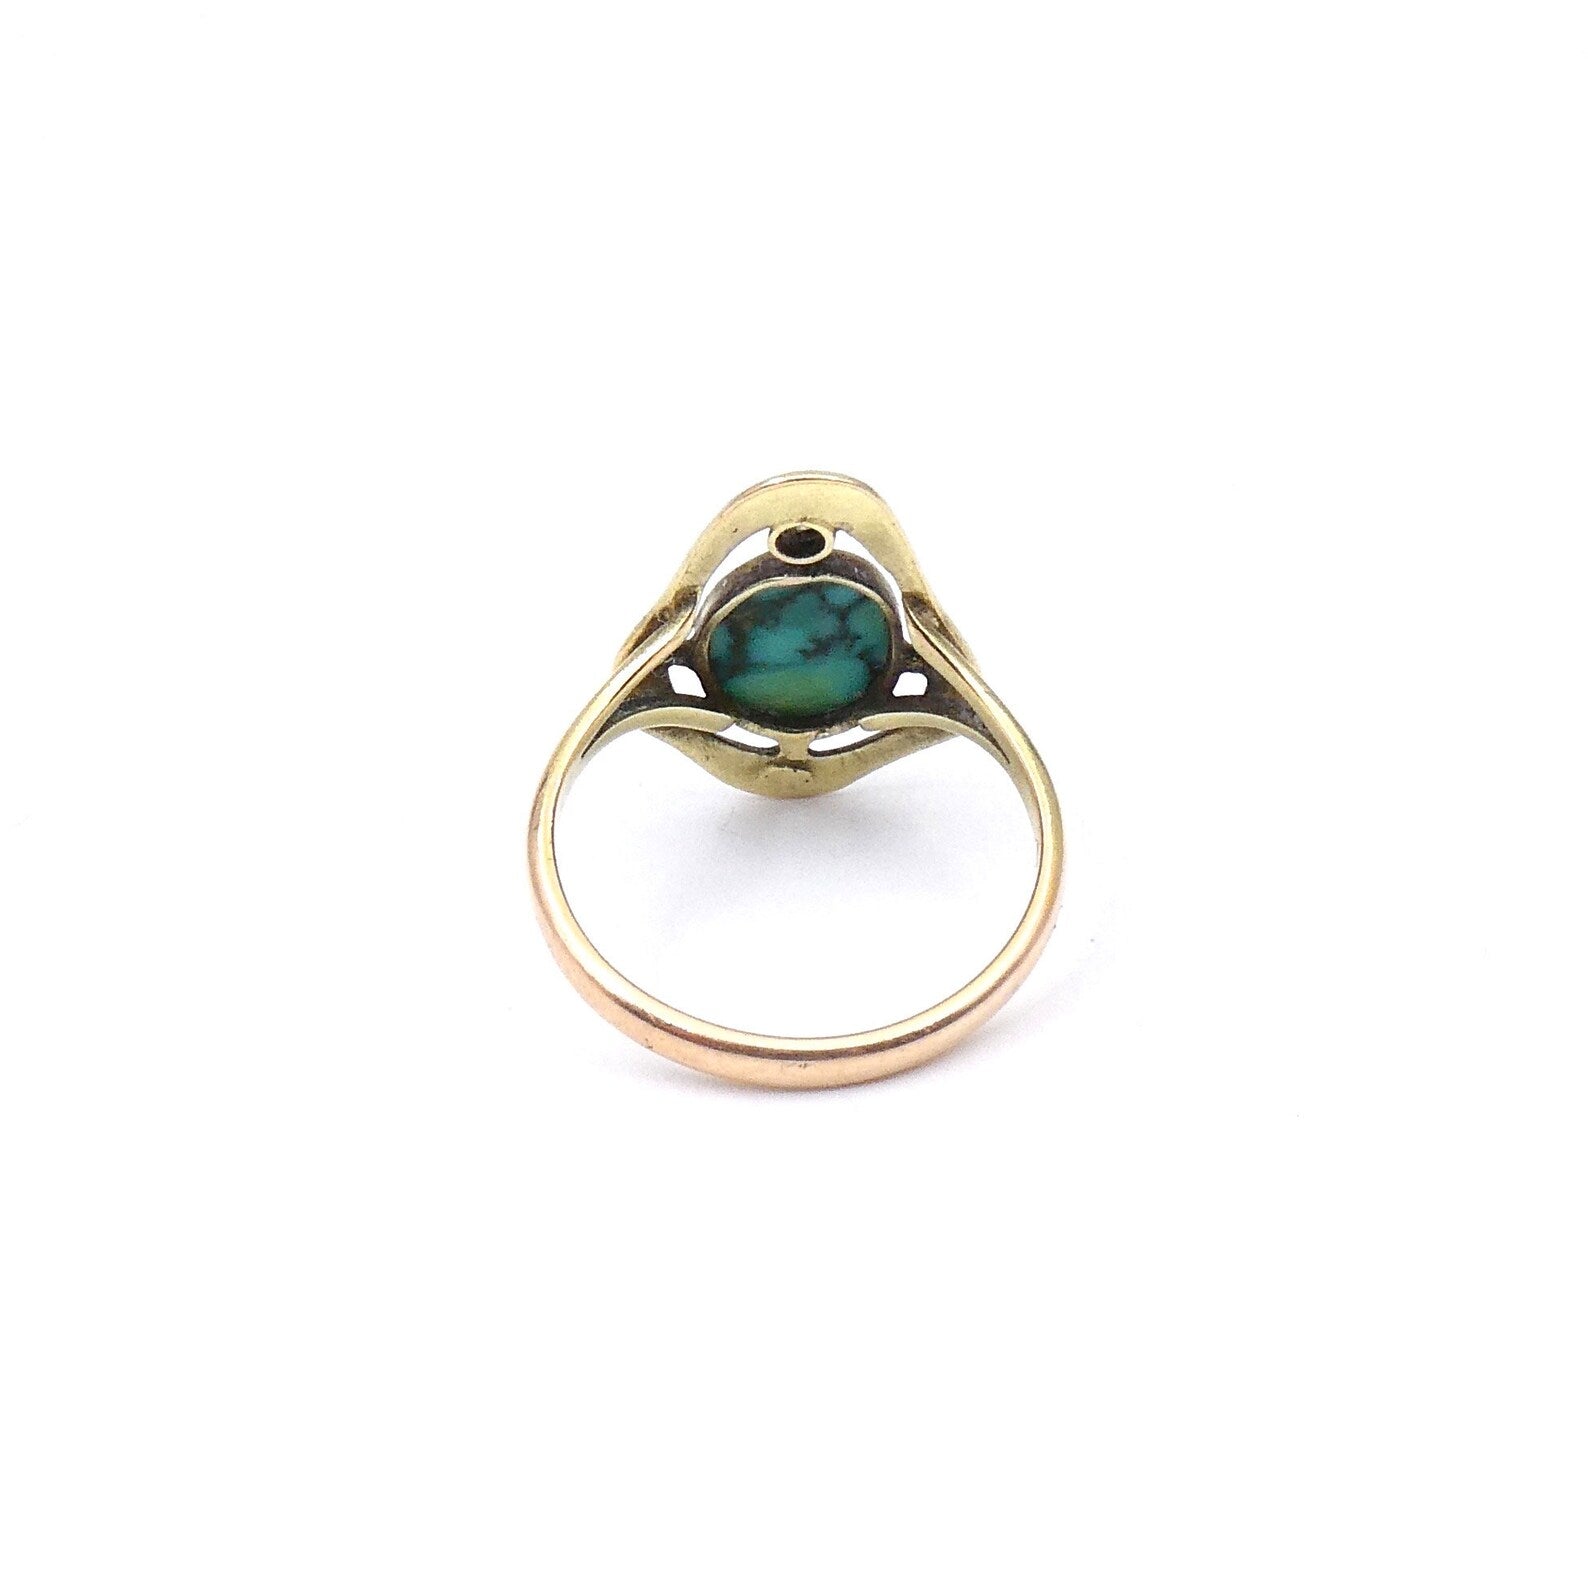 Art Nouveau style ring set with a diamond and turquoise agate, one of a kind ring - Collected